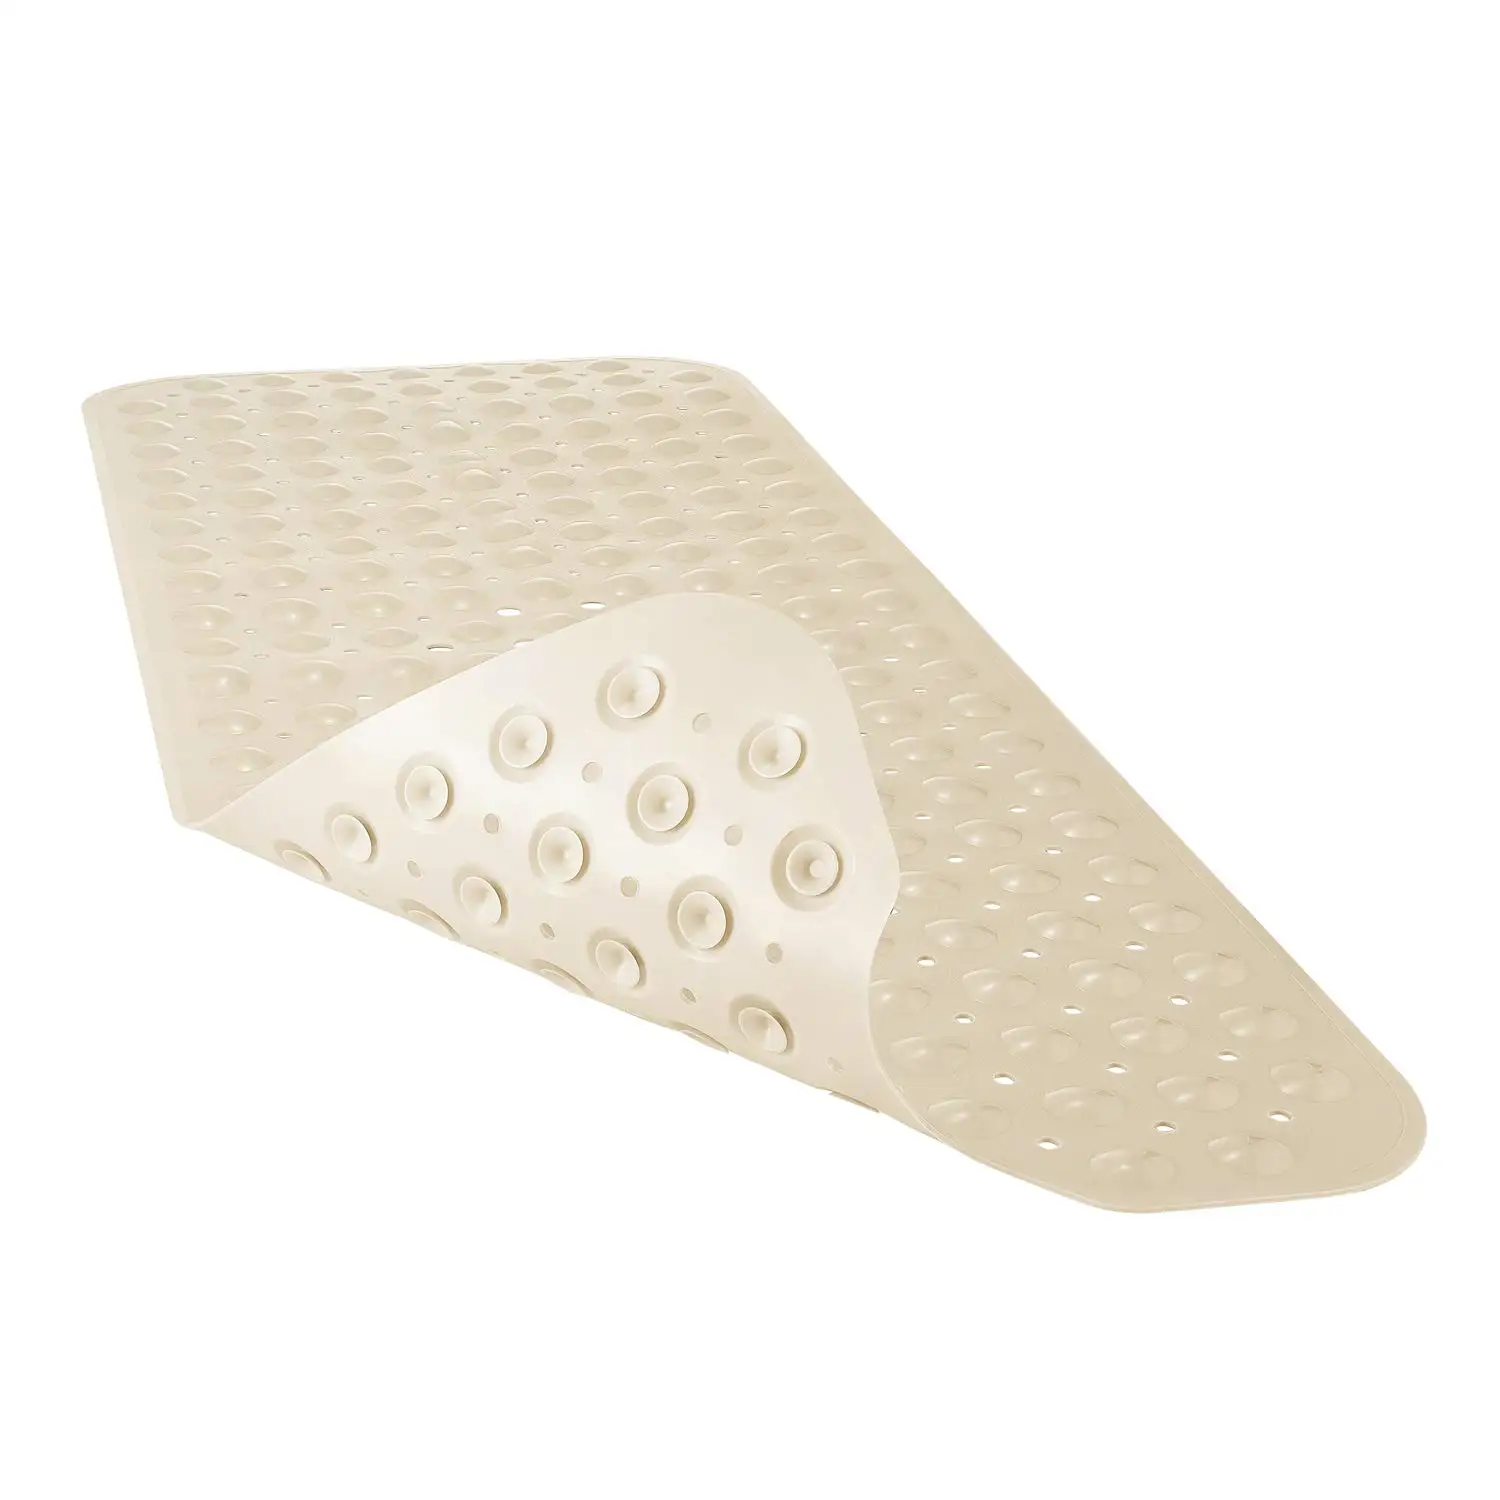 

Bath Tub Shower Mat 40 x 16 Inch Non-Slip and Extra Large Bathtub Mat with Suction Cups Machine Washable Bathroom Mats